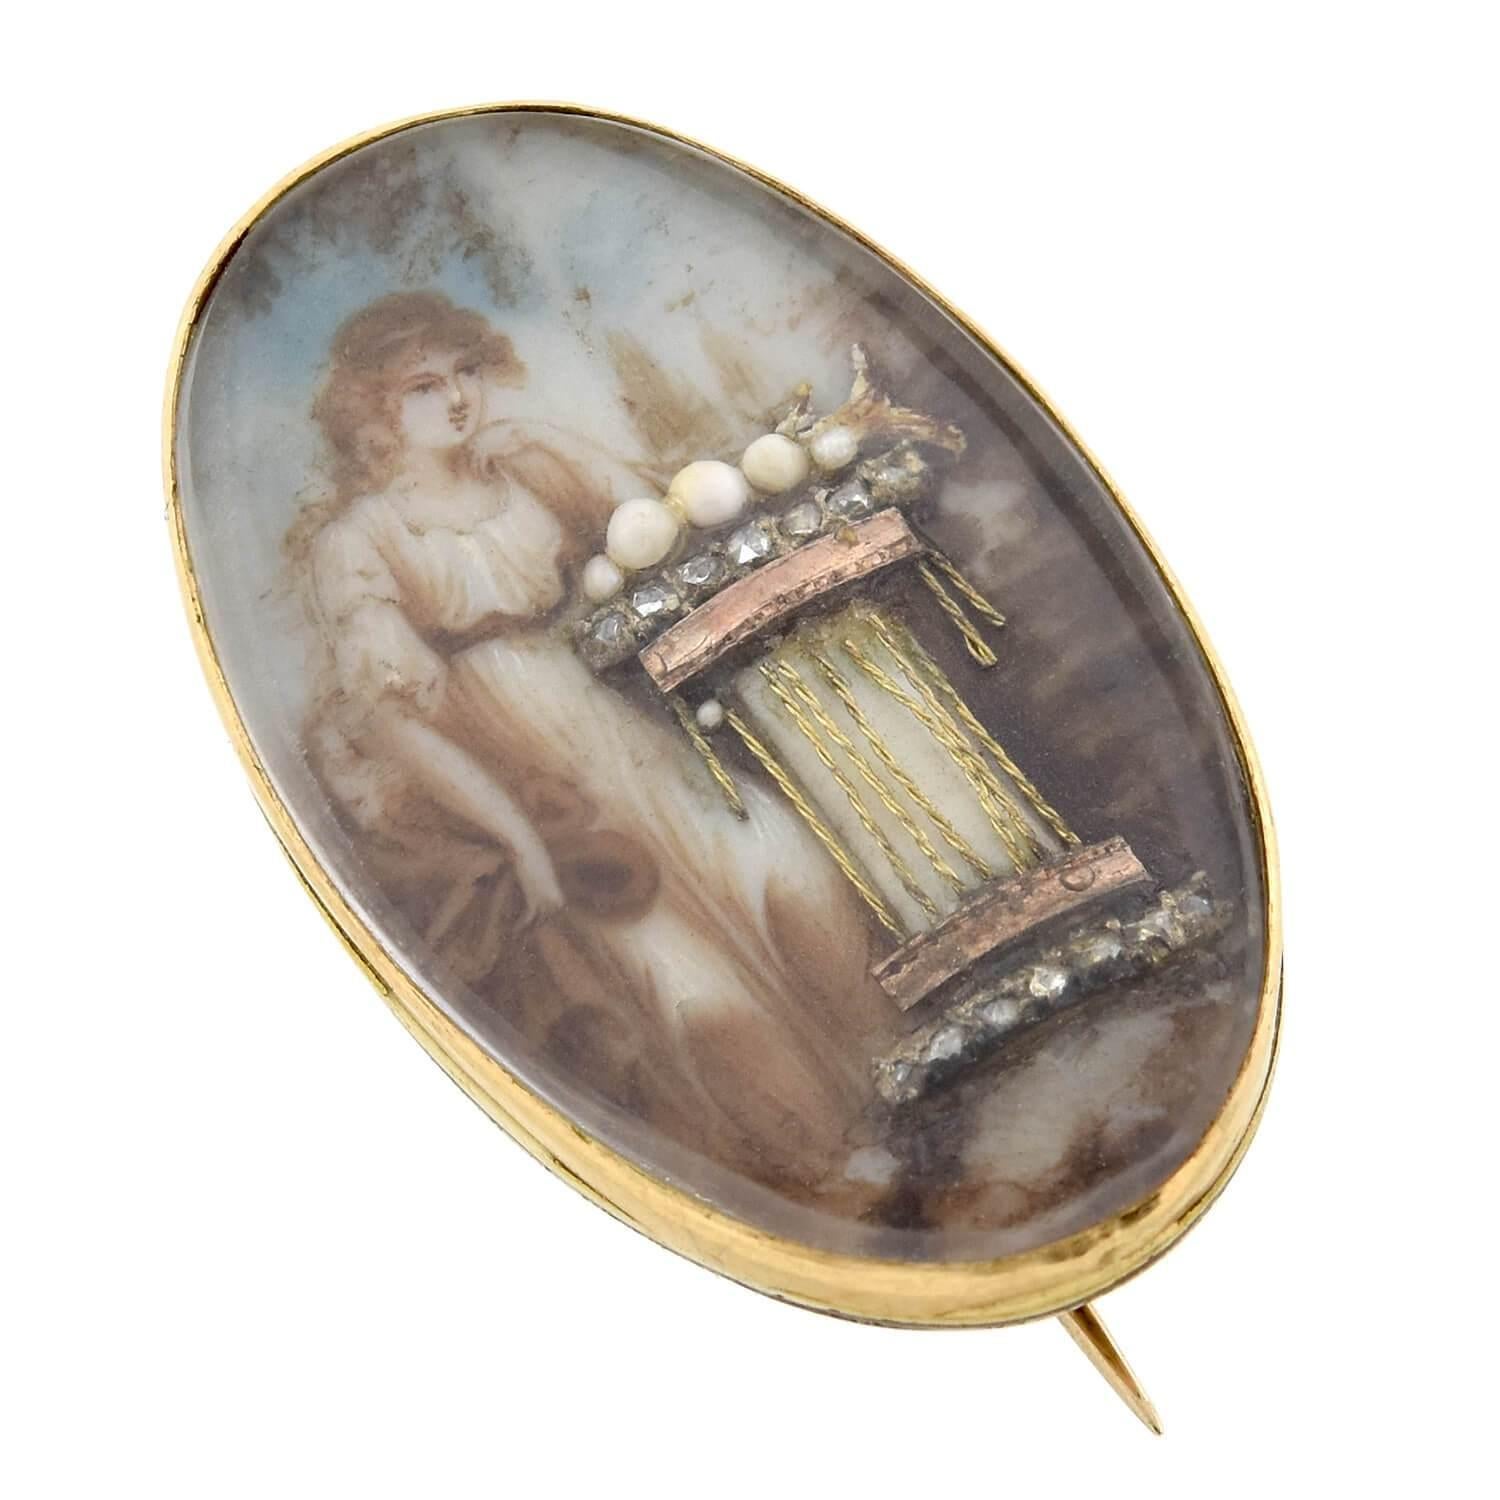 An exceptional mourning pin from the early Victorian (1850-1880s) era! Crafted in 14kt yellow gold, this beautiful piece depicts the image of a woman resting against an ornately embellished pedestal. Hand painted on porcelain, the illustration of